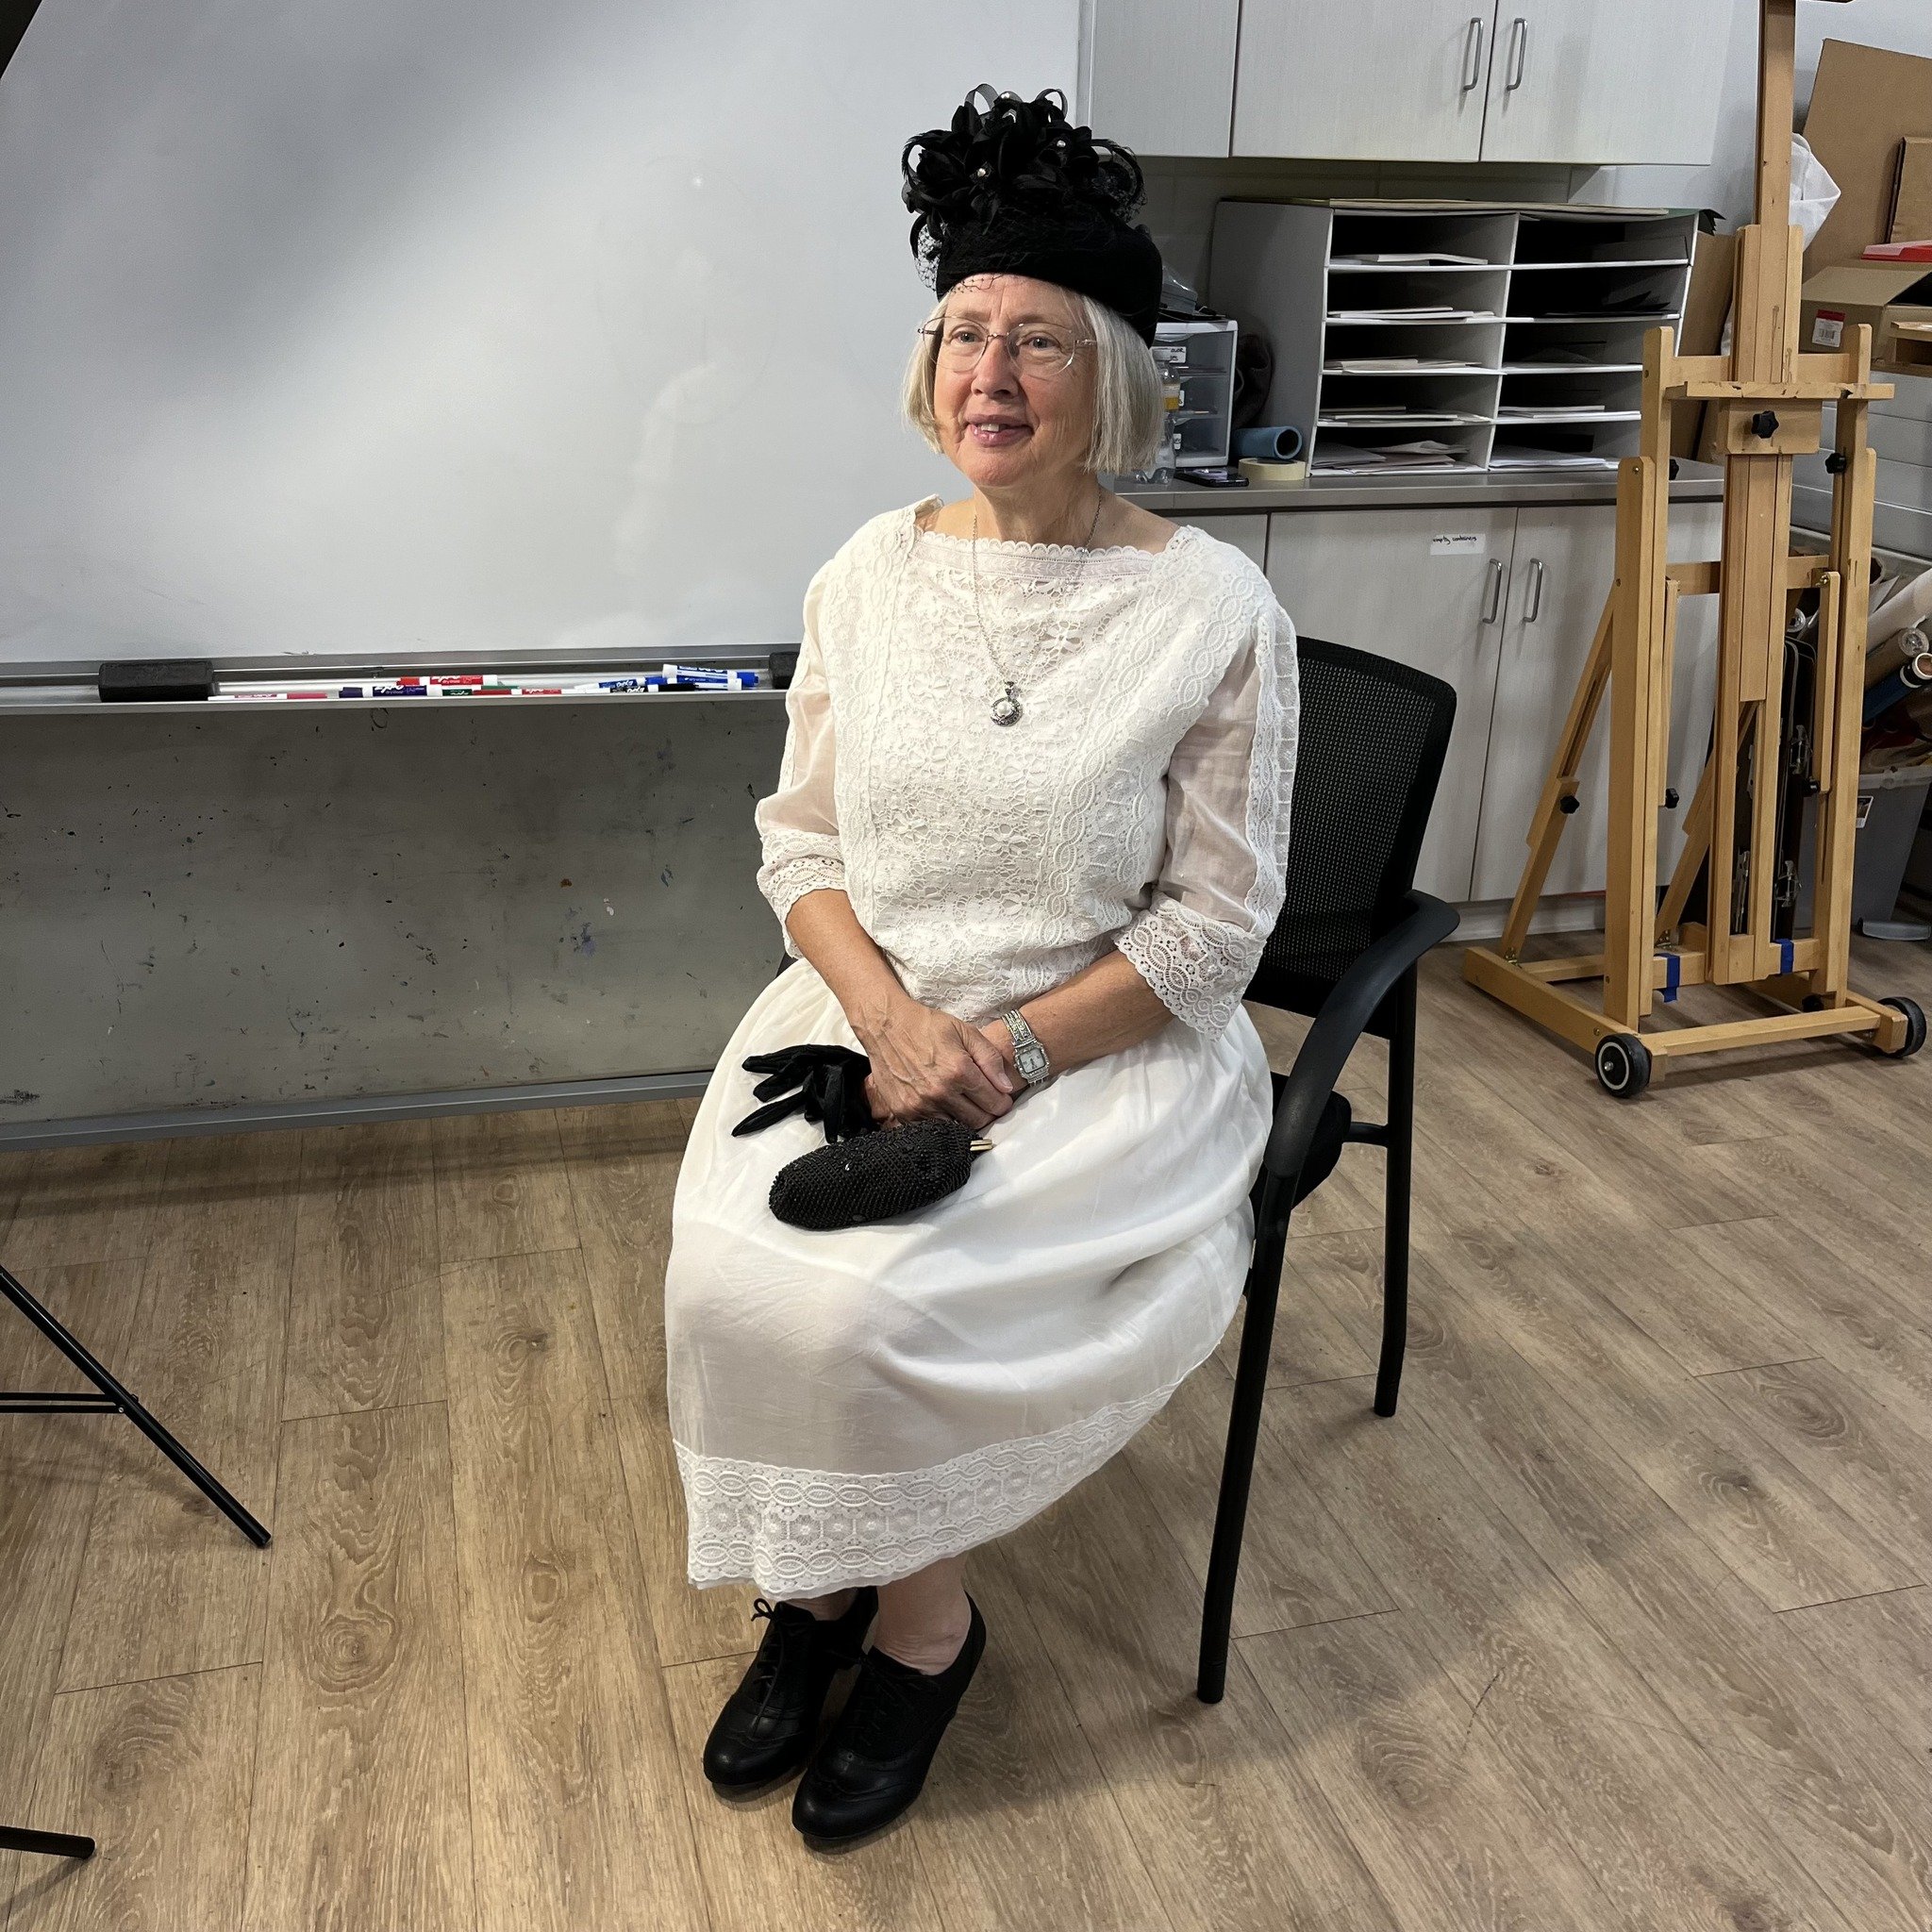 Big thanks to Bonnie, dressed as the Wright Brothers' sister Katharine Wright, for modeling for our artists today! Keep an eye on our social media pages for the resulting artwork tomorrow.
---
If you would like to participate in Friday Morning Art Se